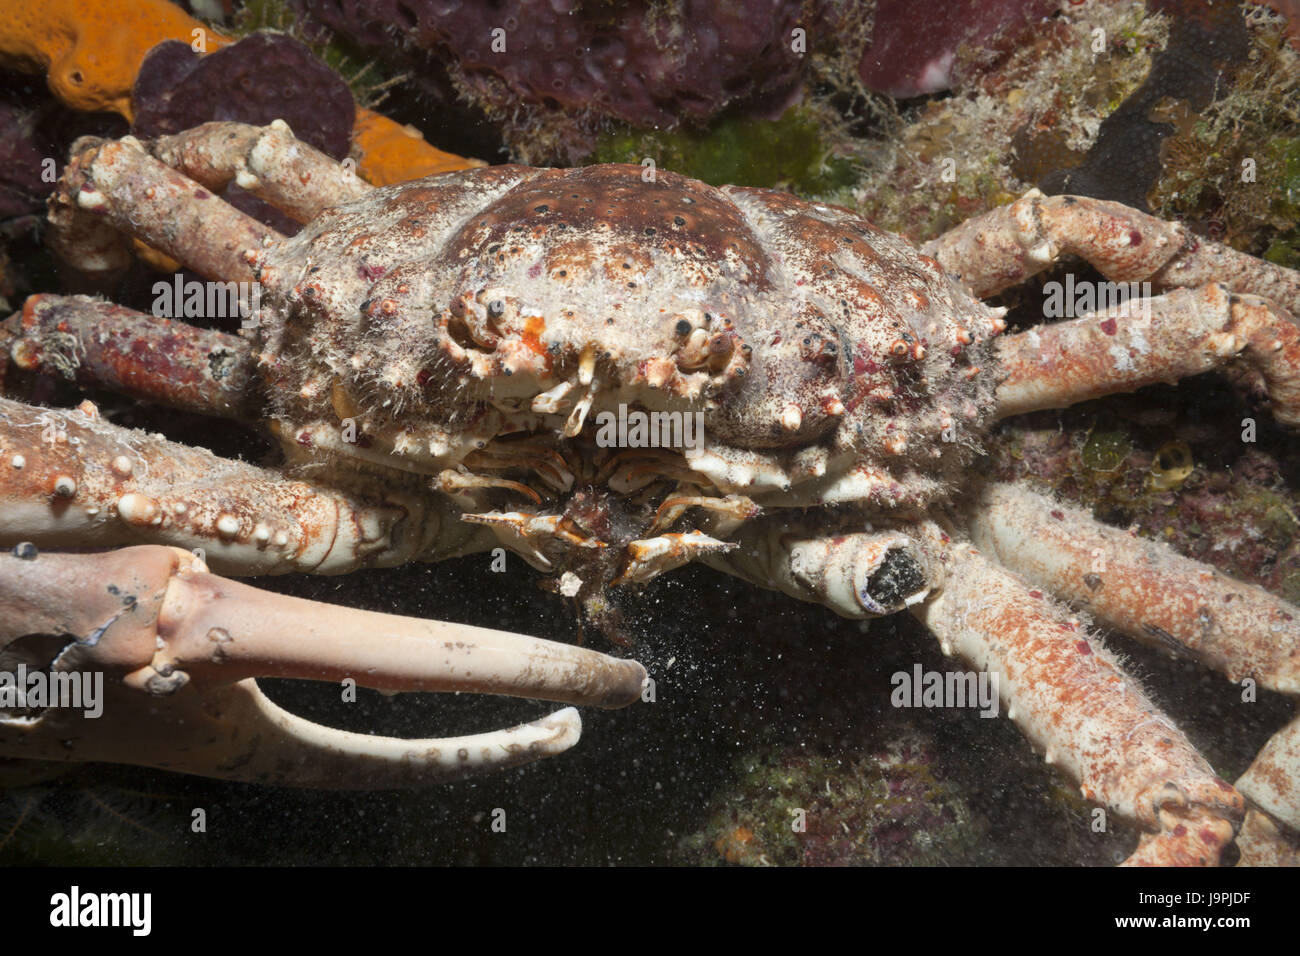 Spiny spinning crab,Mithrax spinosissimus,Cozumel,the Caribbean,Mexico, Stock Photo